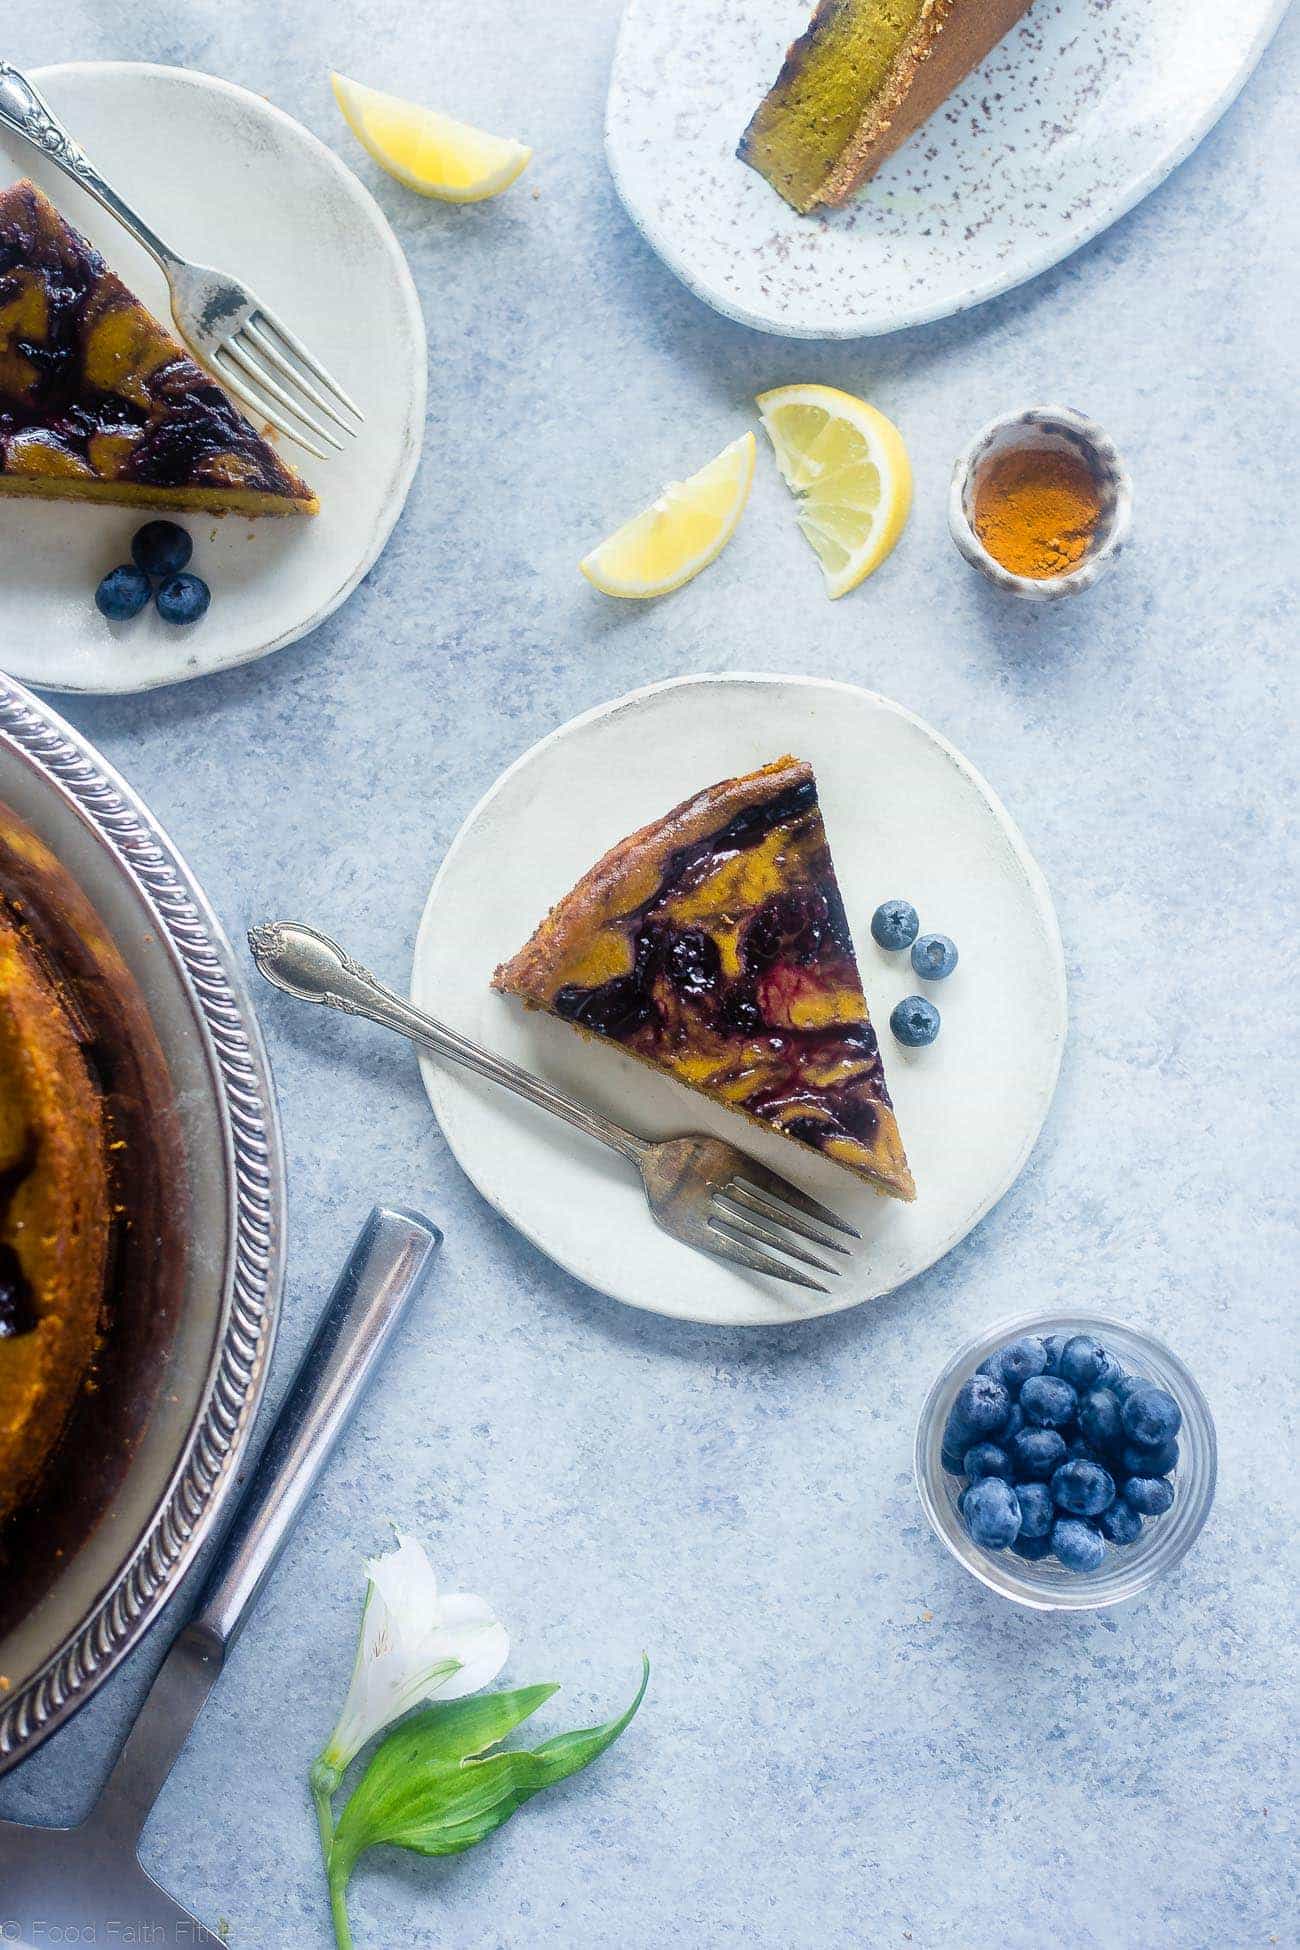 Blueberry Lemon Turmeric Vegan Cheesecake - This easy, paleo friendly cheesecake is made from cashews and has a blueberry swirl! It's so creamy you'll never know it's dairy, grain and gluten free! | Foodfaithfitness.com | @FoodFaithFit